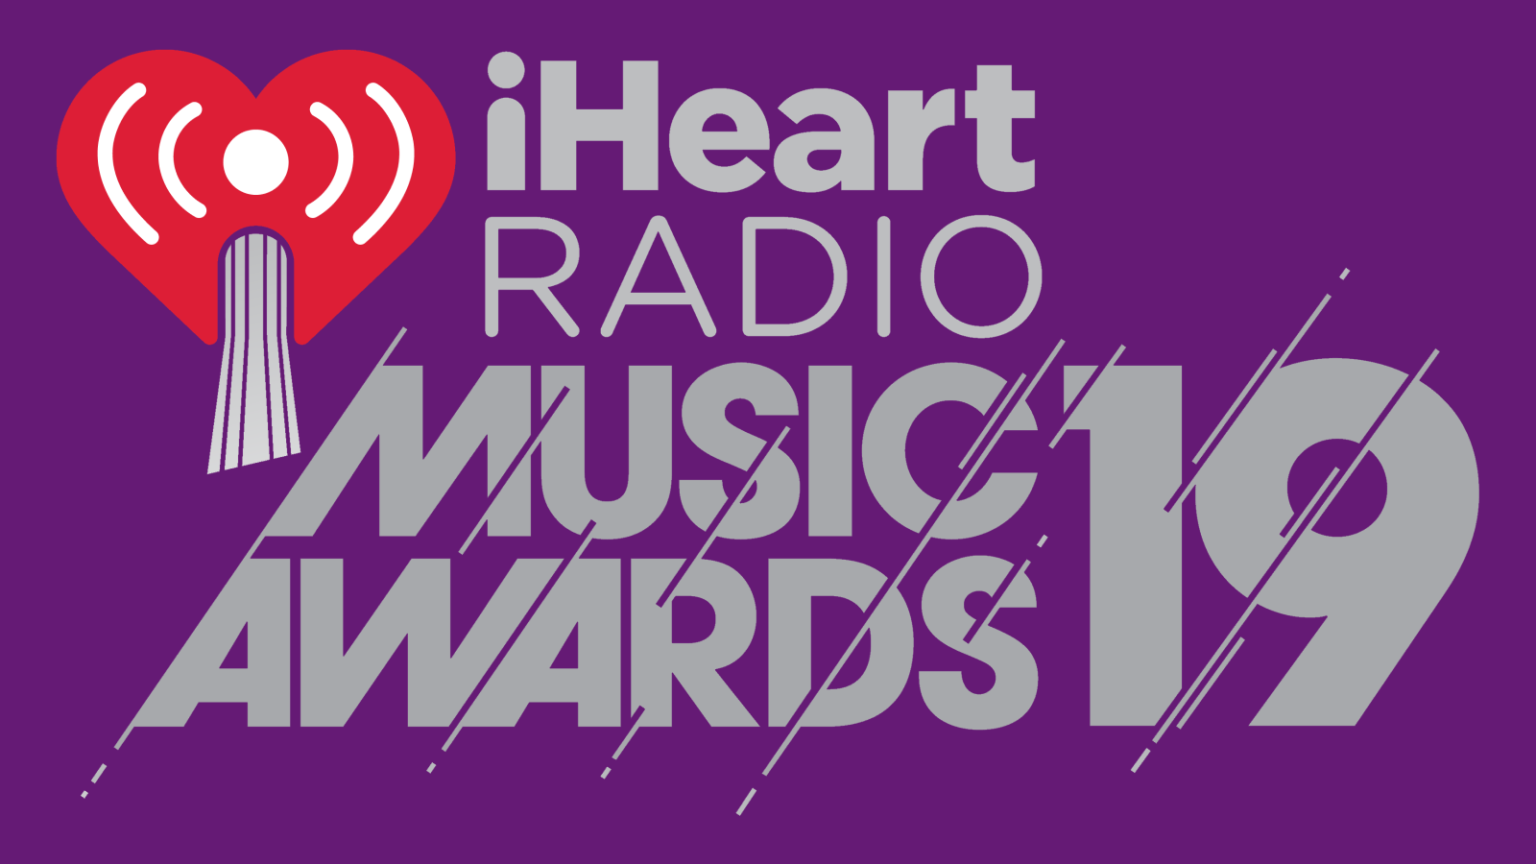 How to Watch the 2019 iHeartRadio Music Awards Online from Anywhere